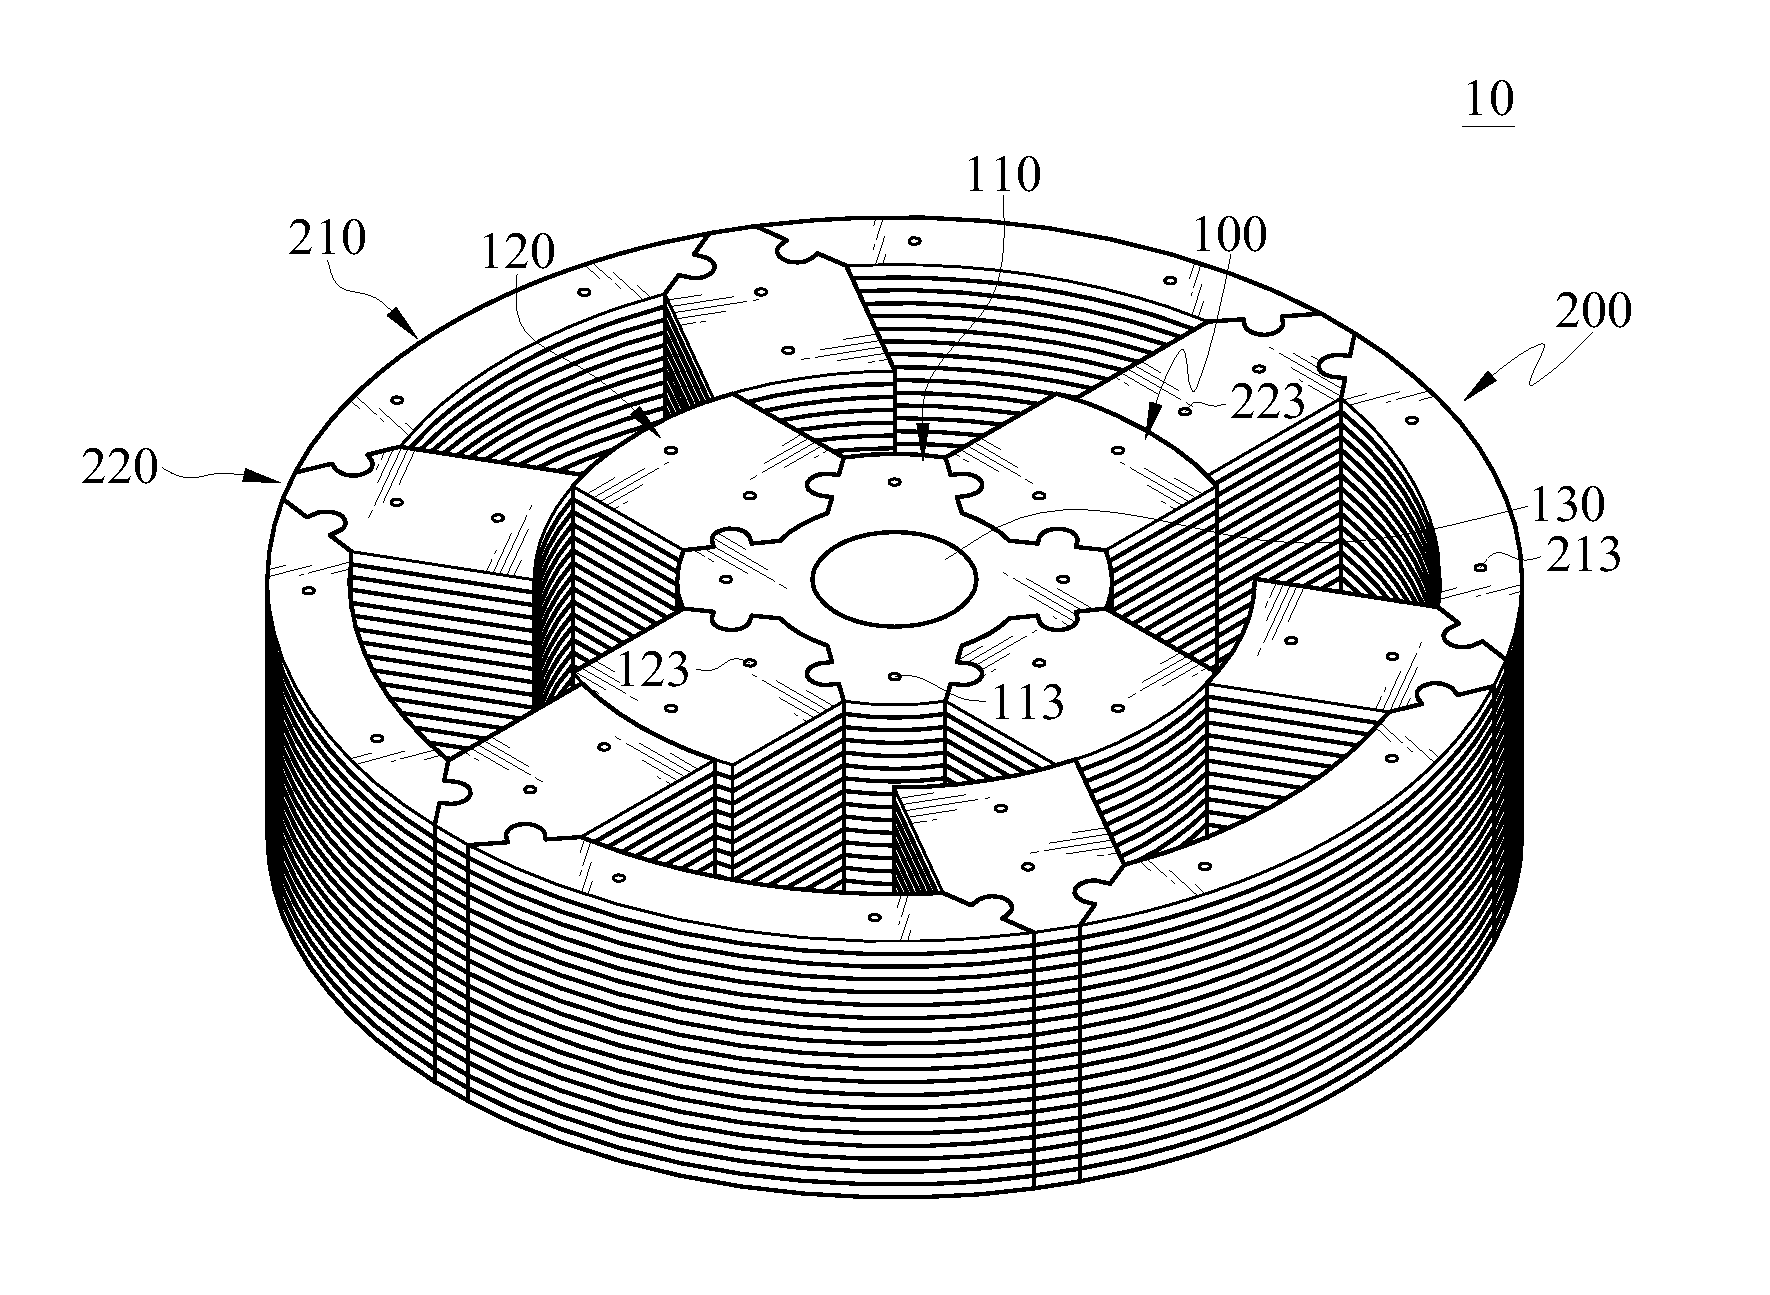 Segmented magneto-conductive structure applied in rotating machines